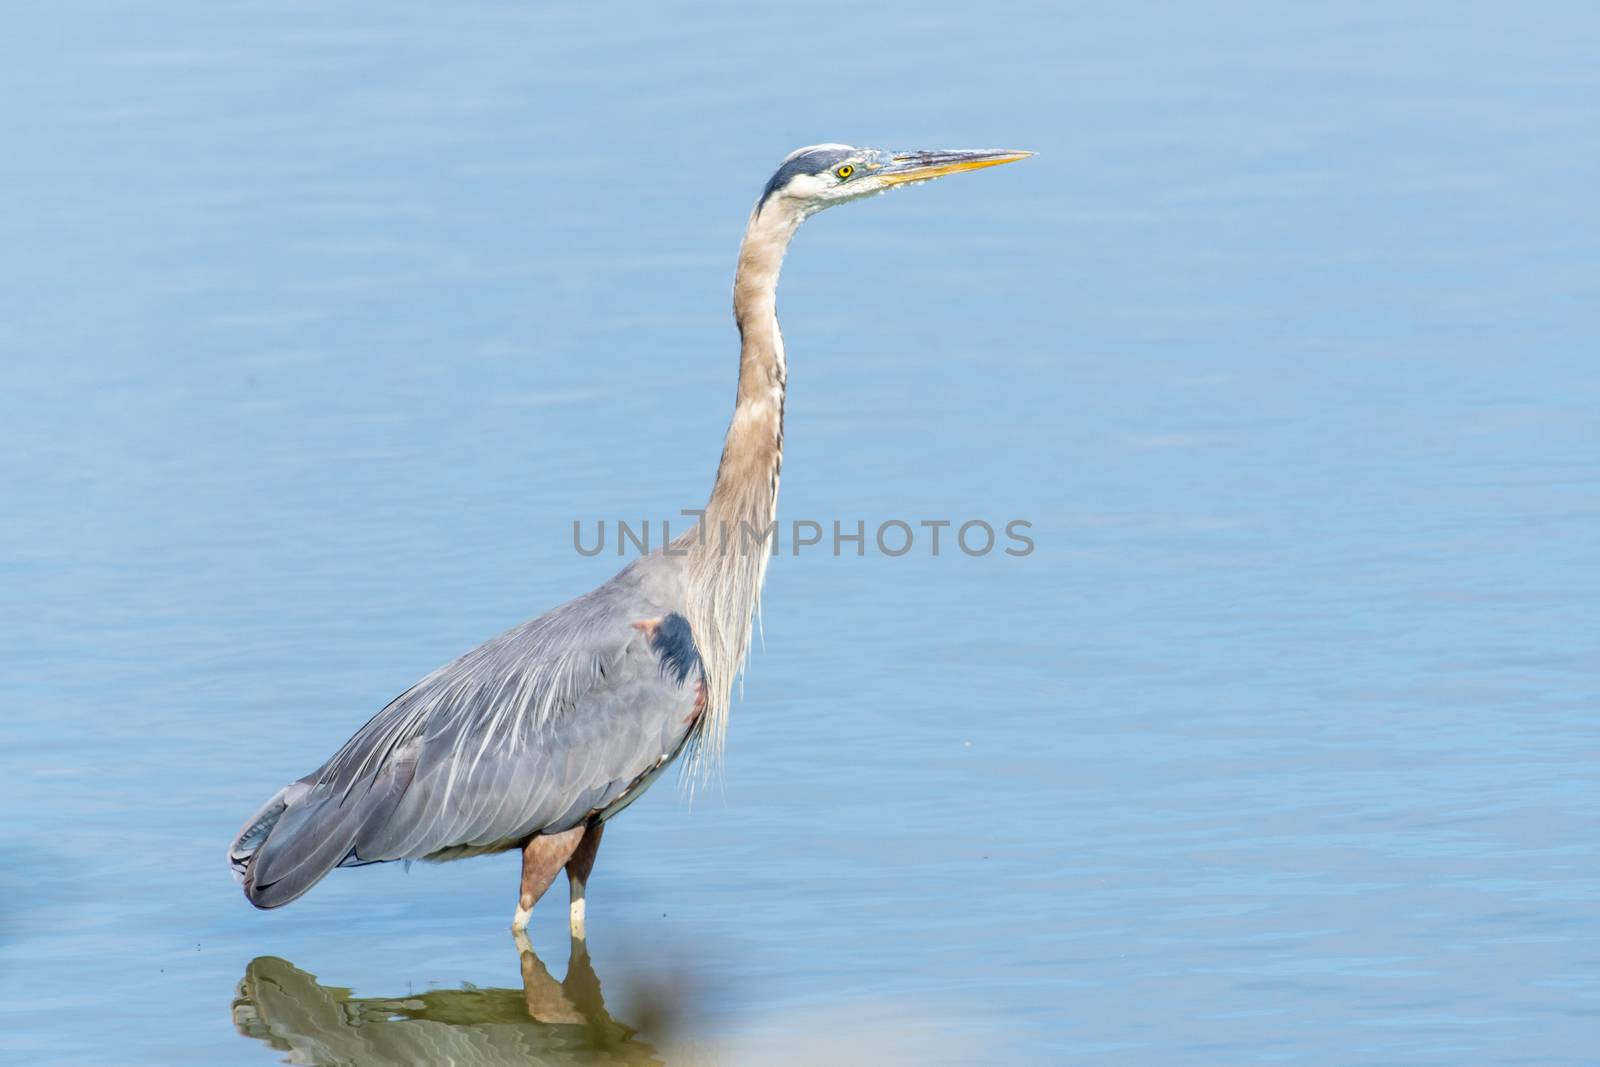 Great Blue Heron's face in the sunshine close up standing wading in the calm waters in Canada looking and hunting for a fish (ardea herodias).